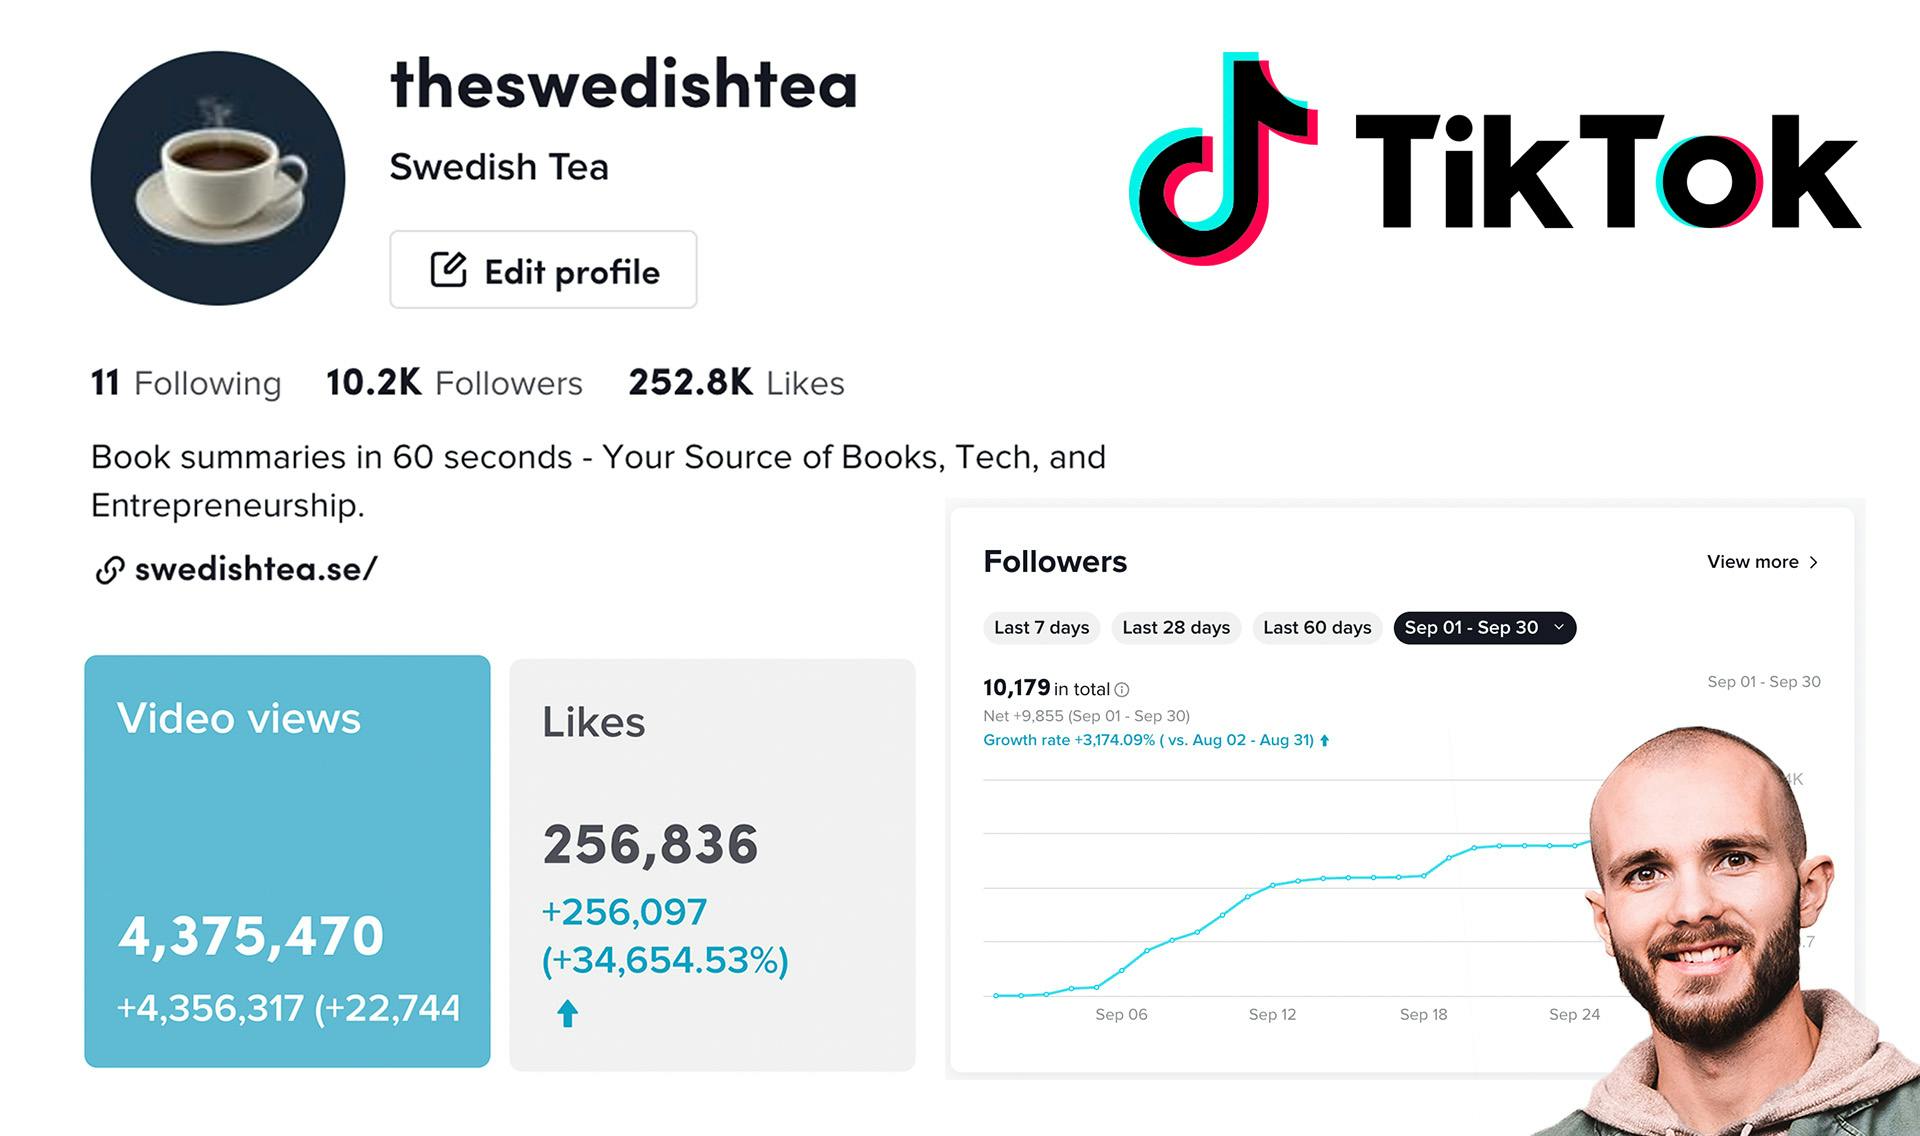 1 month TikTok growth experiment - From 0 to 4.4M views and 10.2K followers 🚀